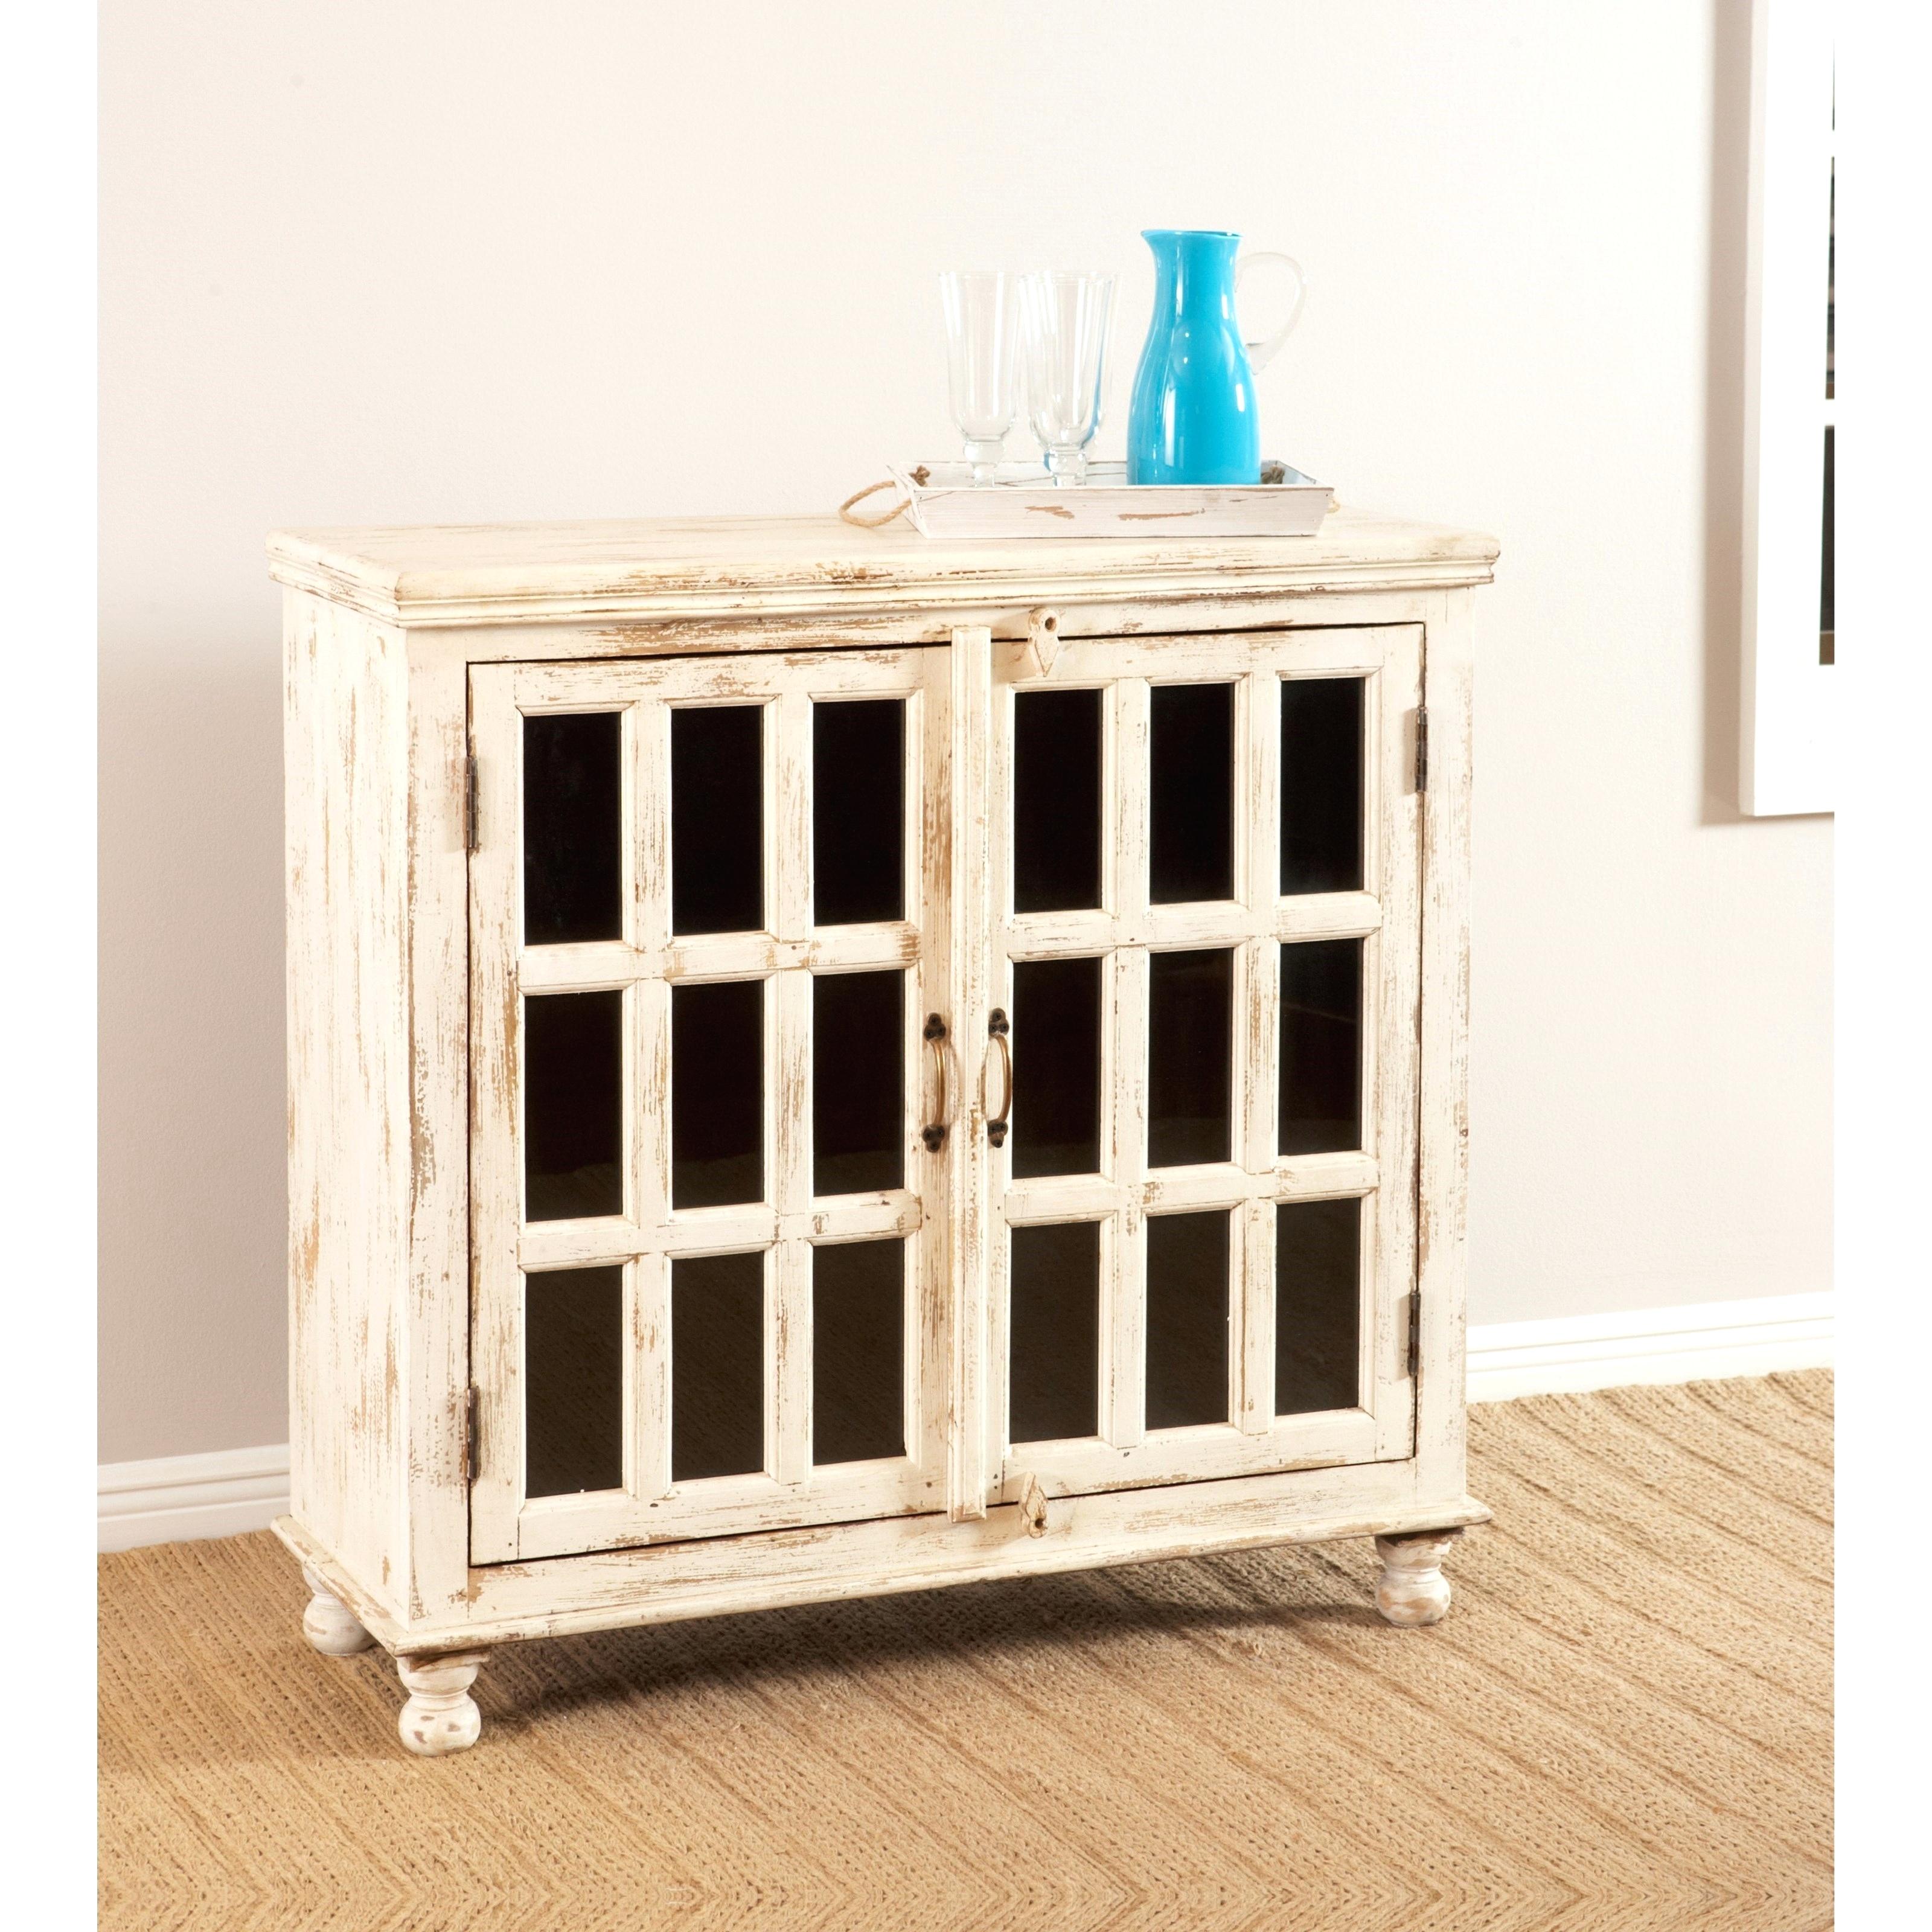 end table with glass doors studiocreative info largo rustic collectibles two door accent cabinet black console mirrored chest tall floor reading lamps spray paint primer for wood